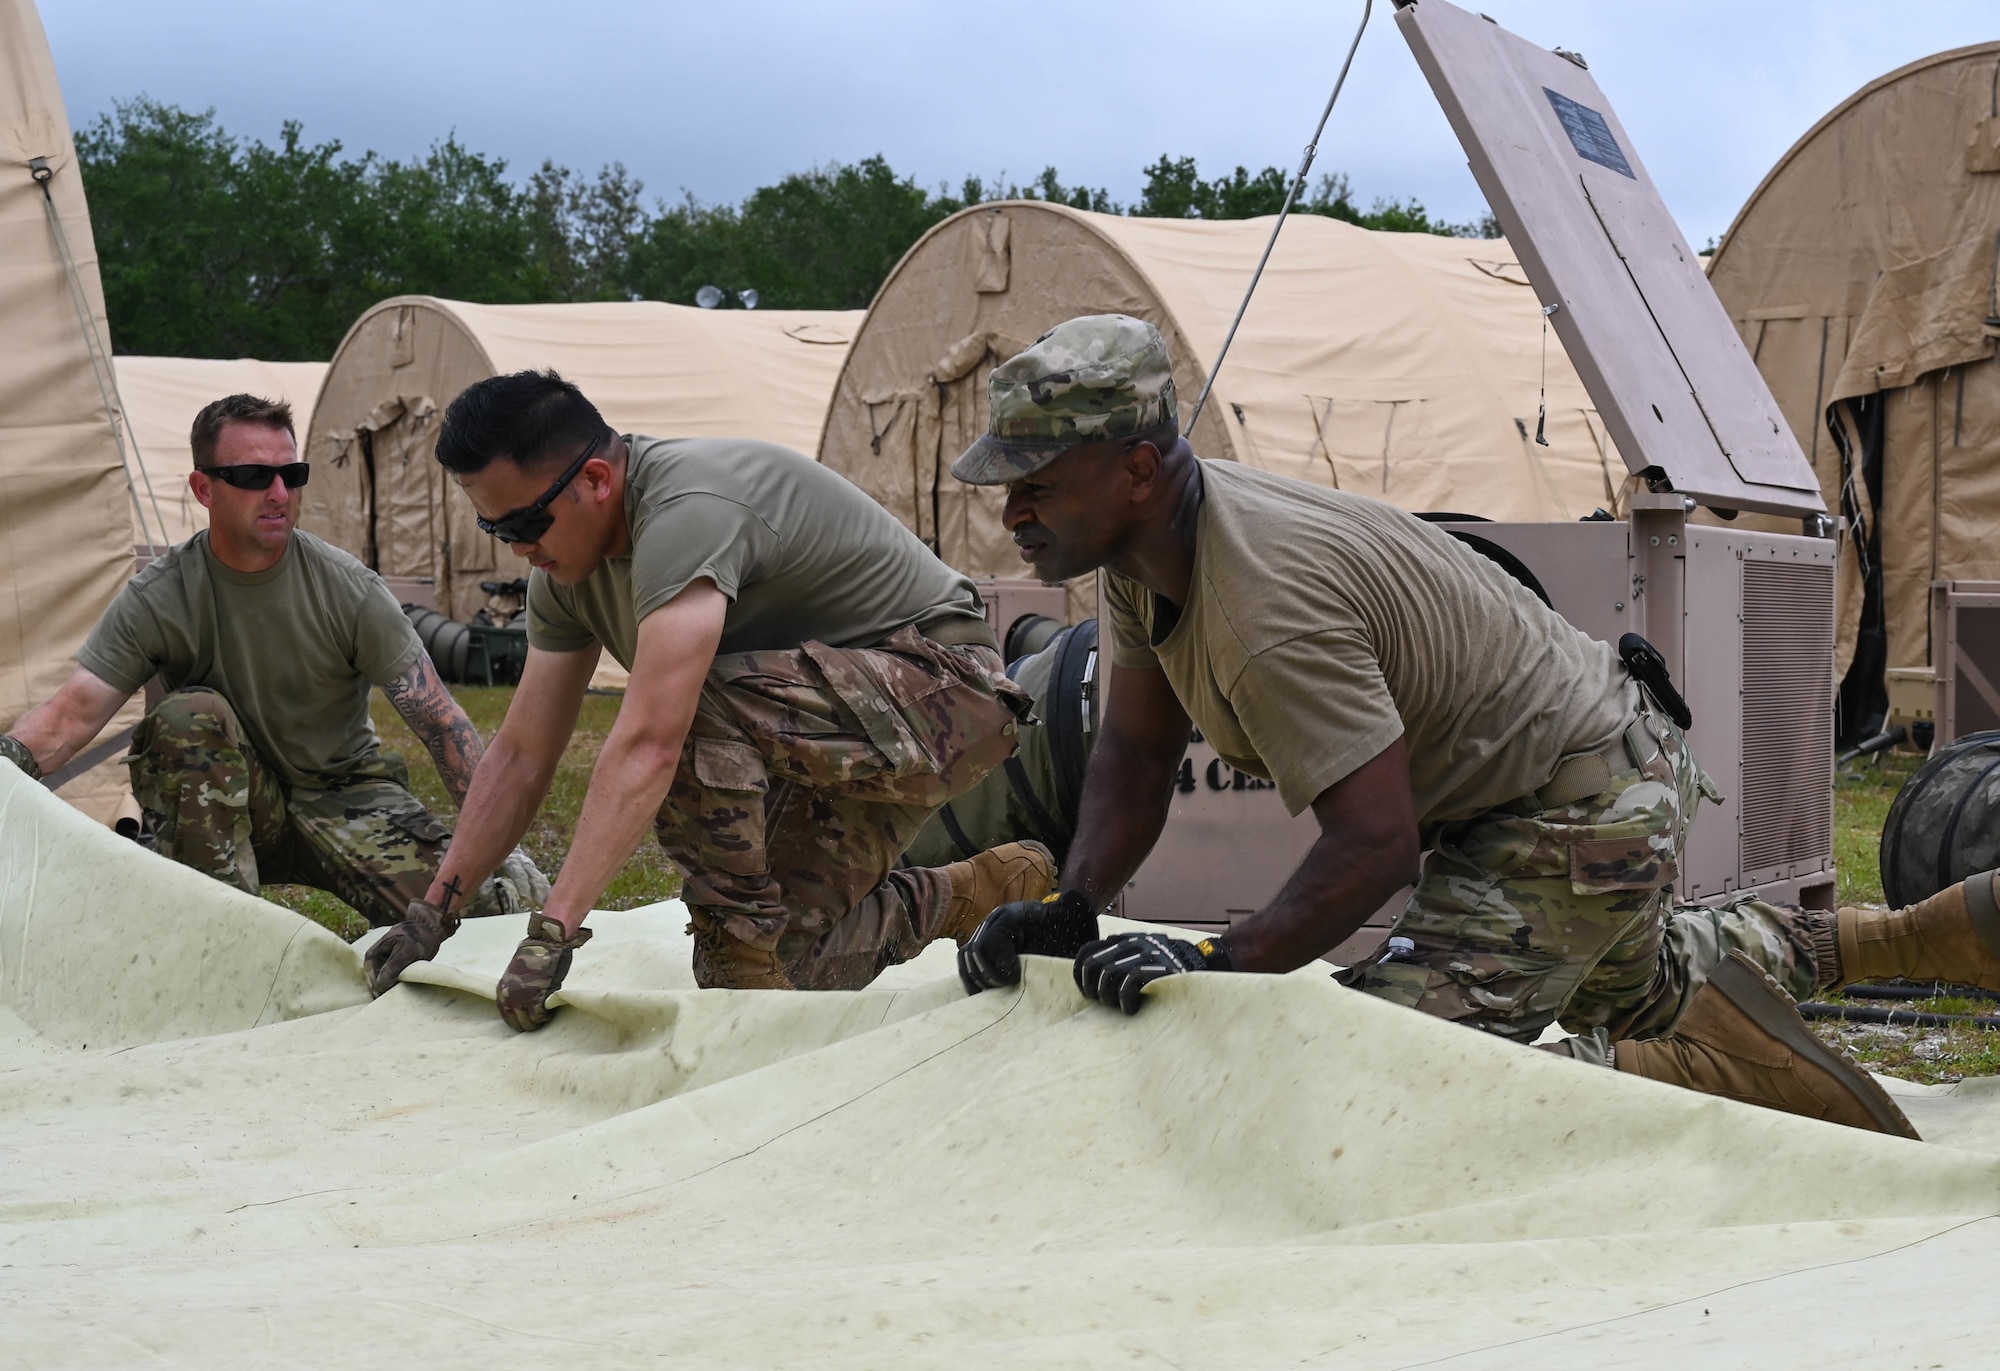 U.S. Air Force Airmen pack tents at Naval Outlying Landing Field Choctaw, Florida, May 4, 2021. The tents were used during Agile Flag 21-2, an experiment that tests a units capability to deploy and succeed in a bare base situation. (U.S. Air Force photo by Senior Airman Sarah Dowe)